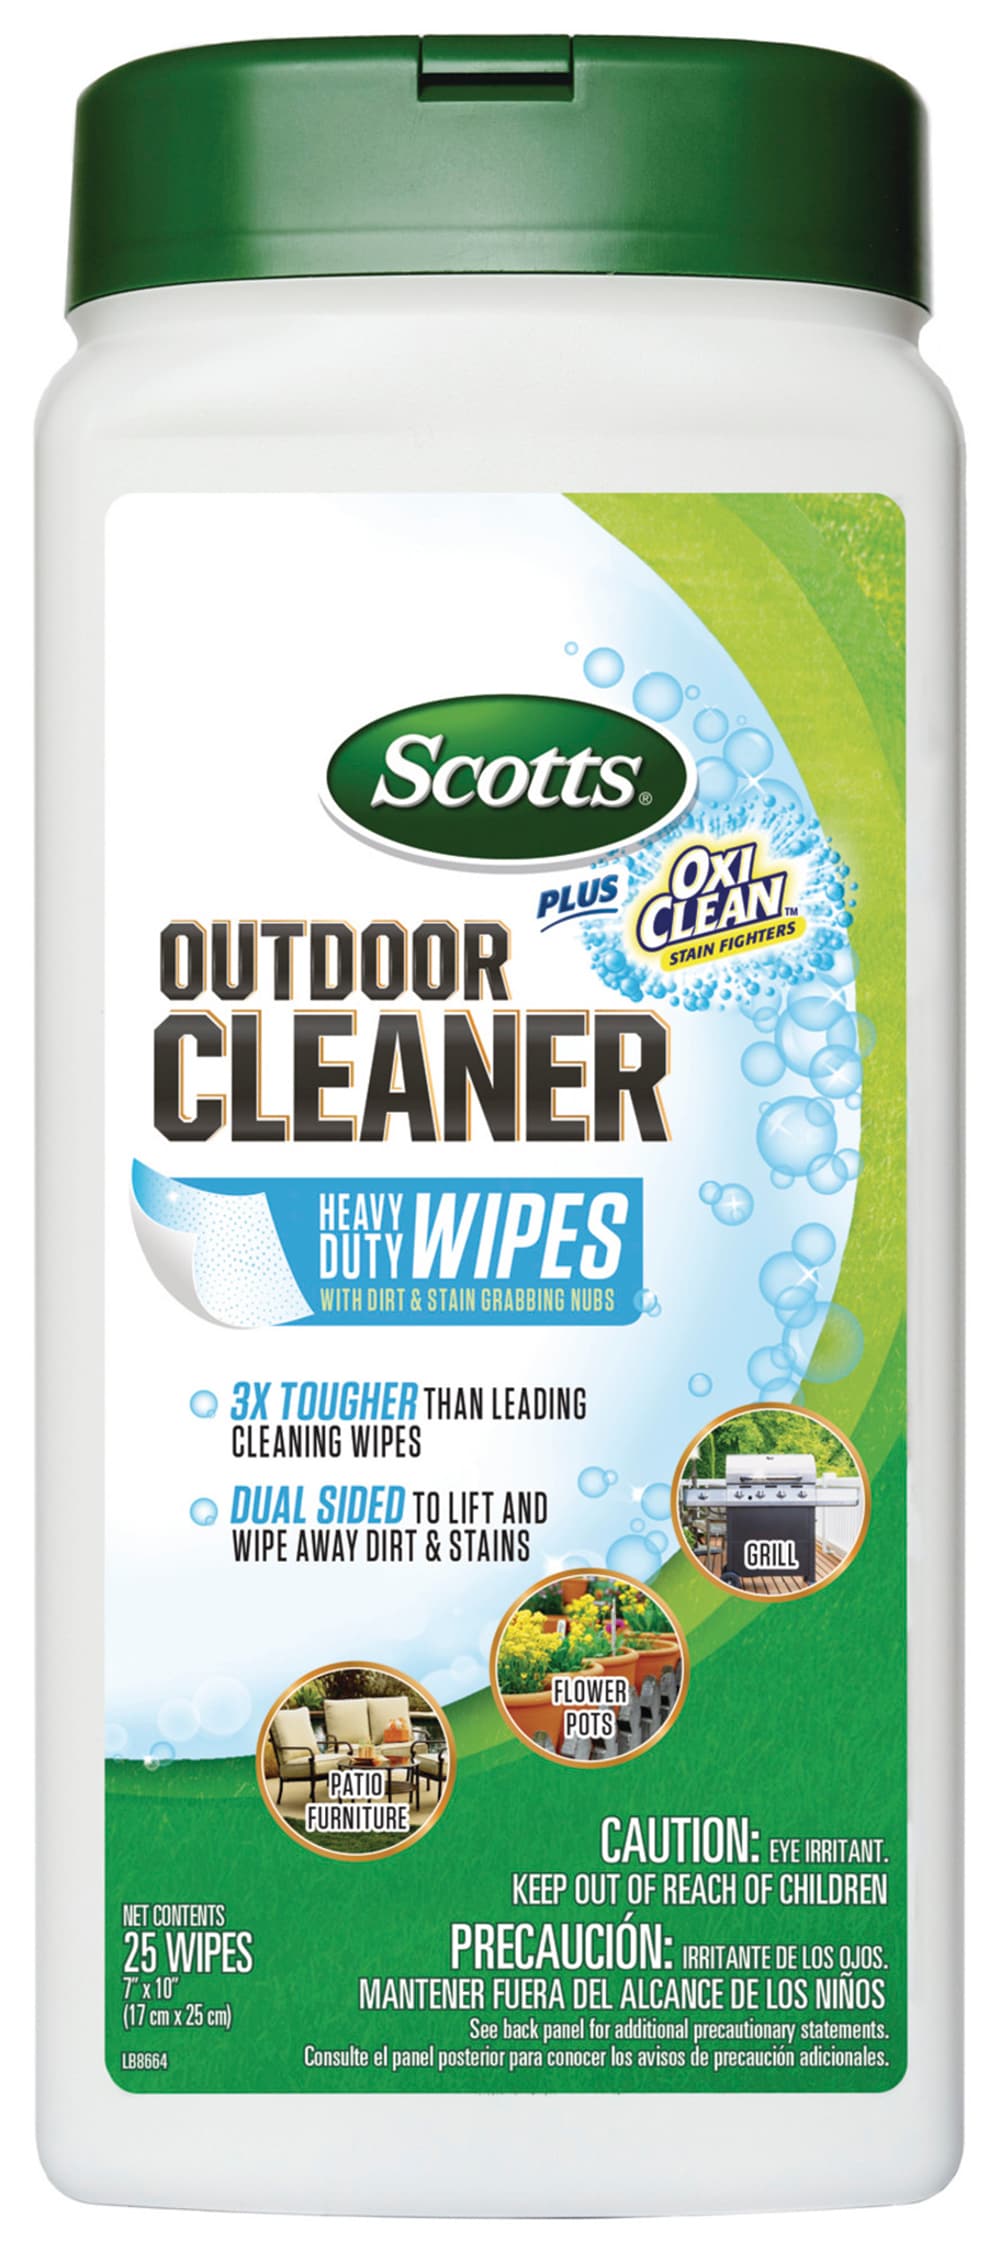 Tub O' Towels Heavy Duty Multi-surface Cleaning Wipes - 7 X 8